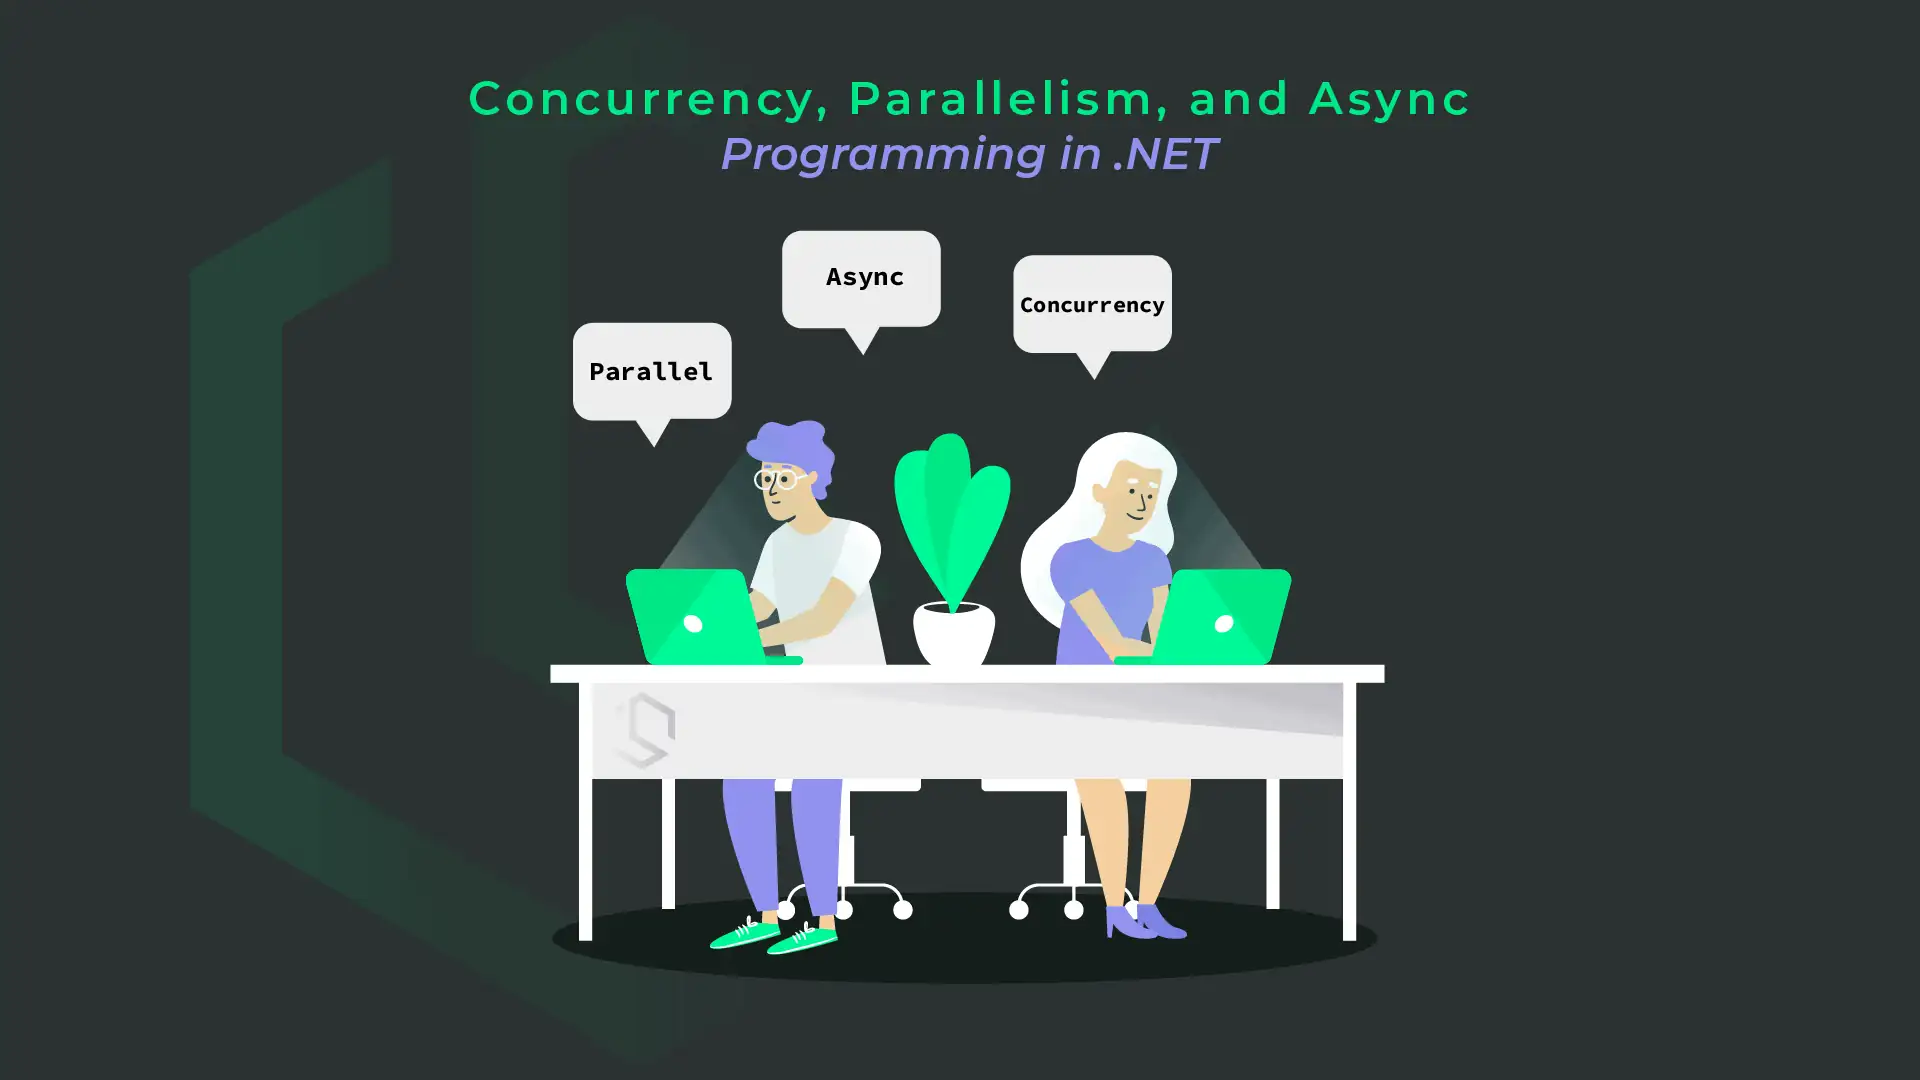 Demystifying Concurrency, Parallelism, and Asynchronous Programming in .NET, Concurrency, Parallelism, Asynchronous 